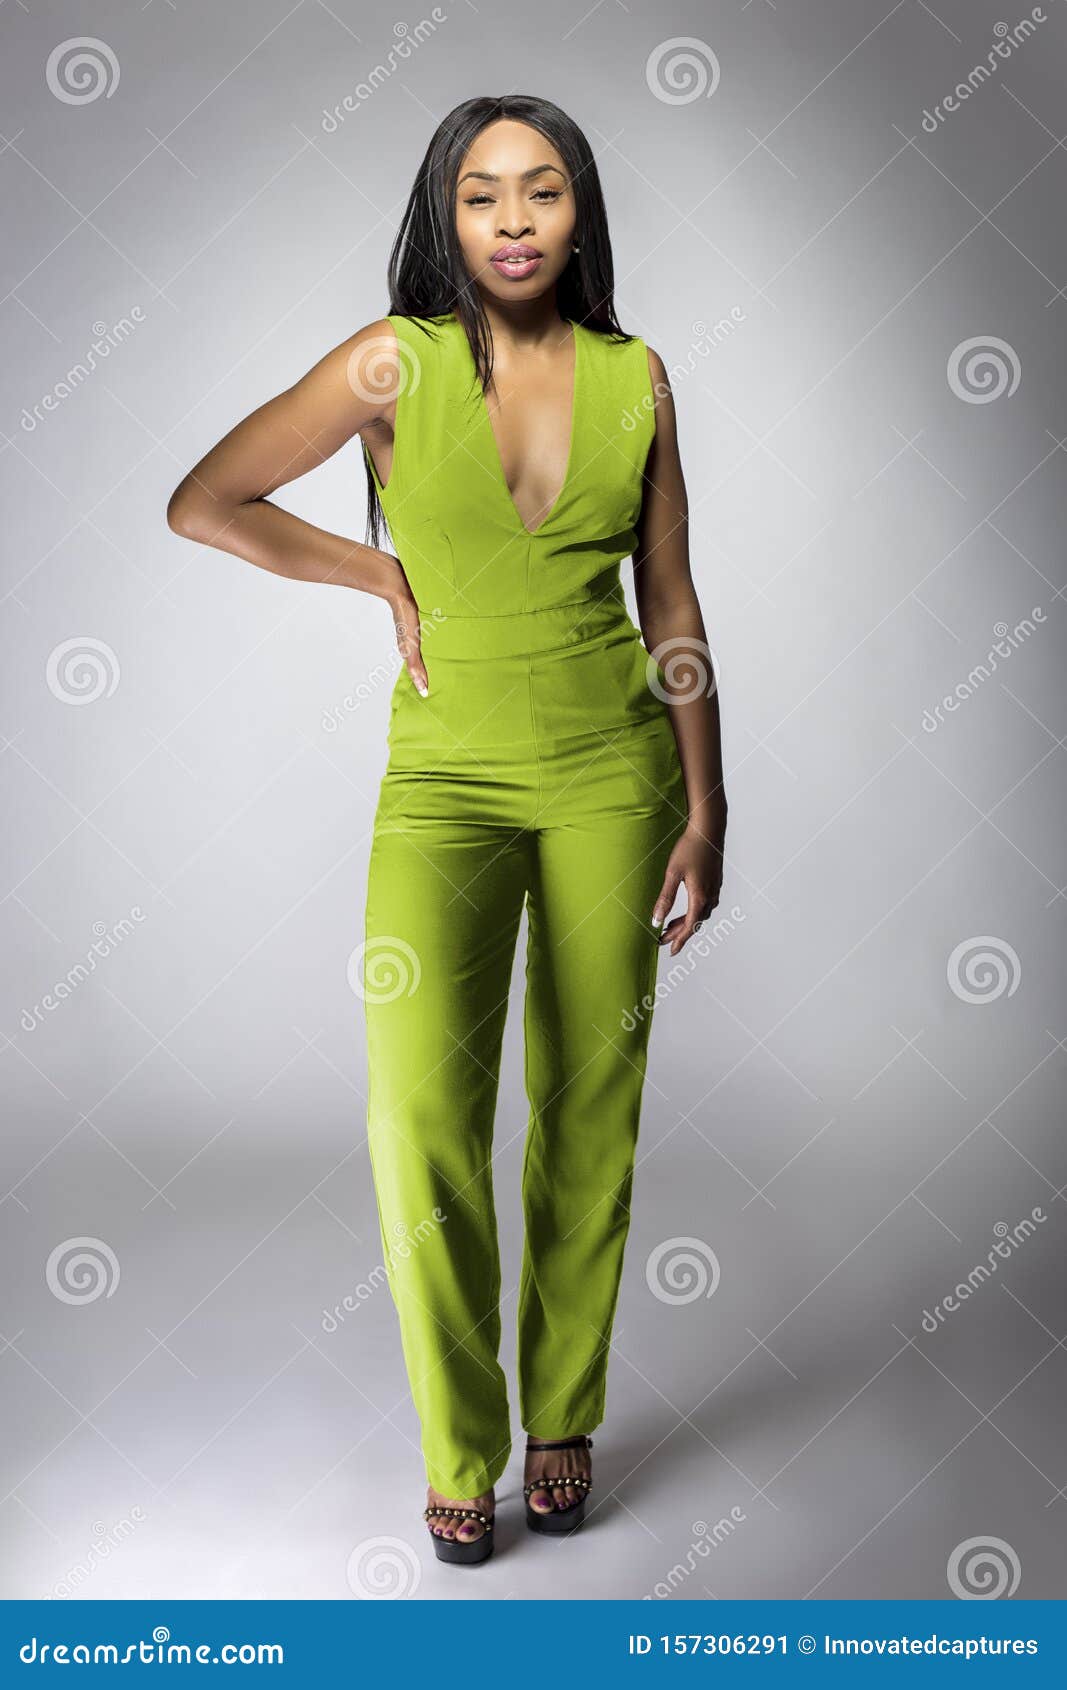 African American Fashion Model Wearing a Lime Jumpsuit Stock Image - Image of fall, jumpsuit: 157306291